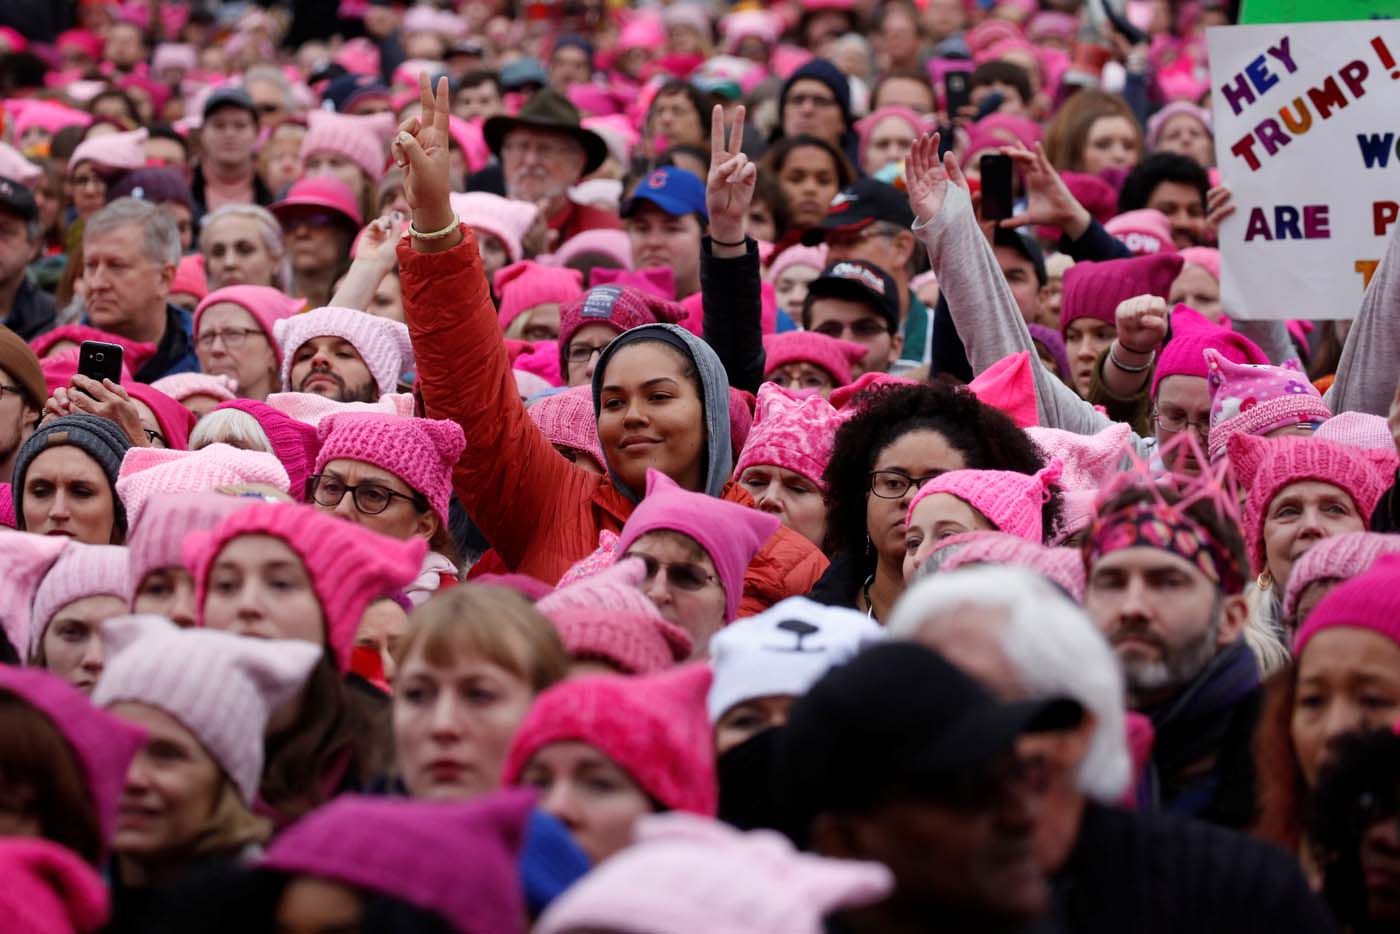 People gather for the Women's March in Washington U.S., January 21, 2017. REUTERS/Shannon Stapleton